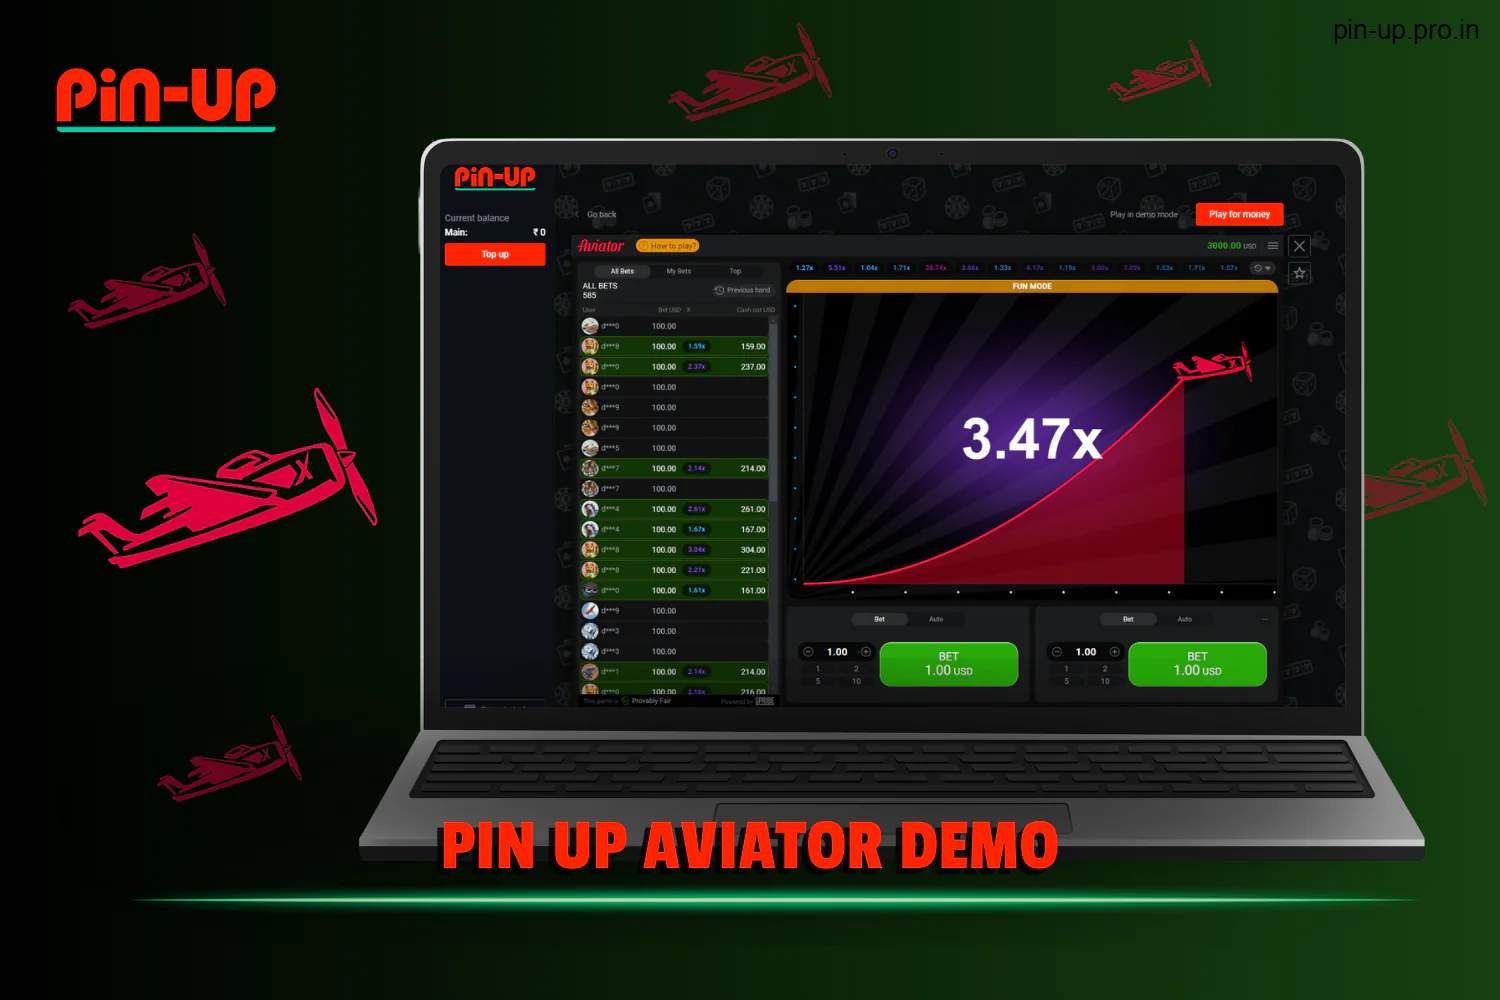 PinUp Aviator has a demo version of the game for Indian users, which will allow them to develop their own game strategy